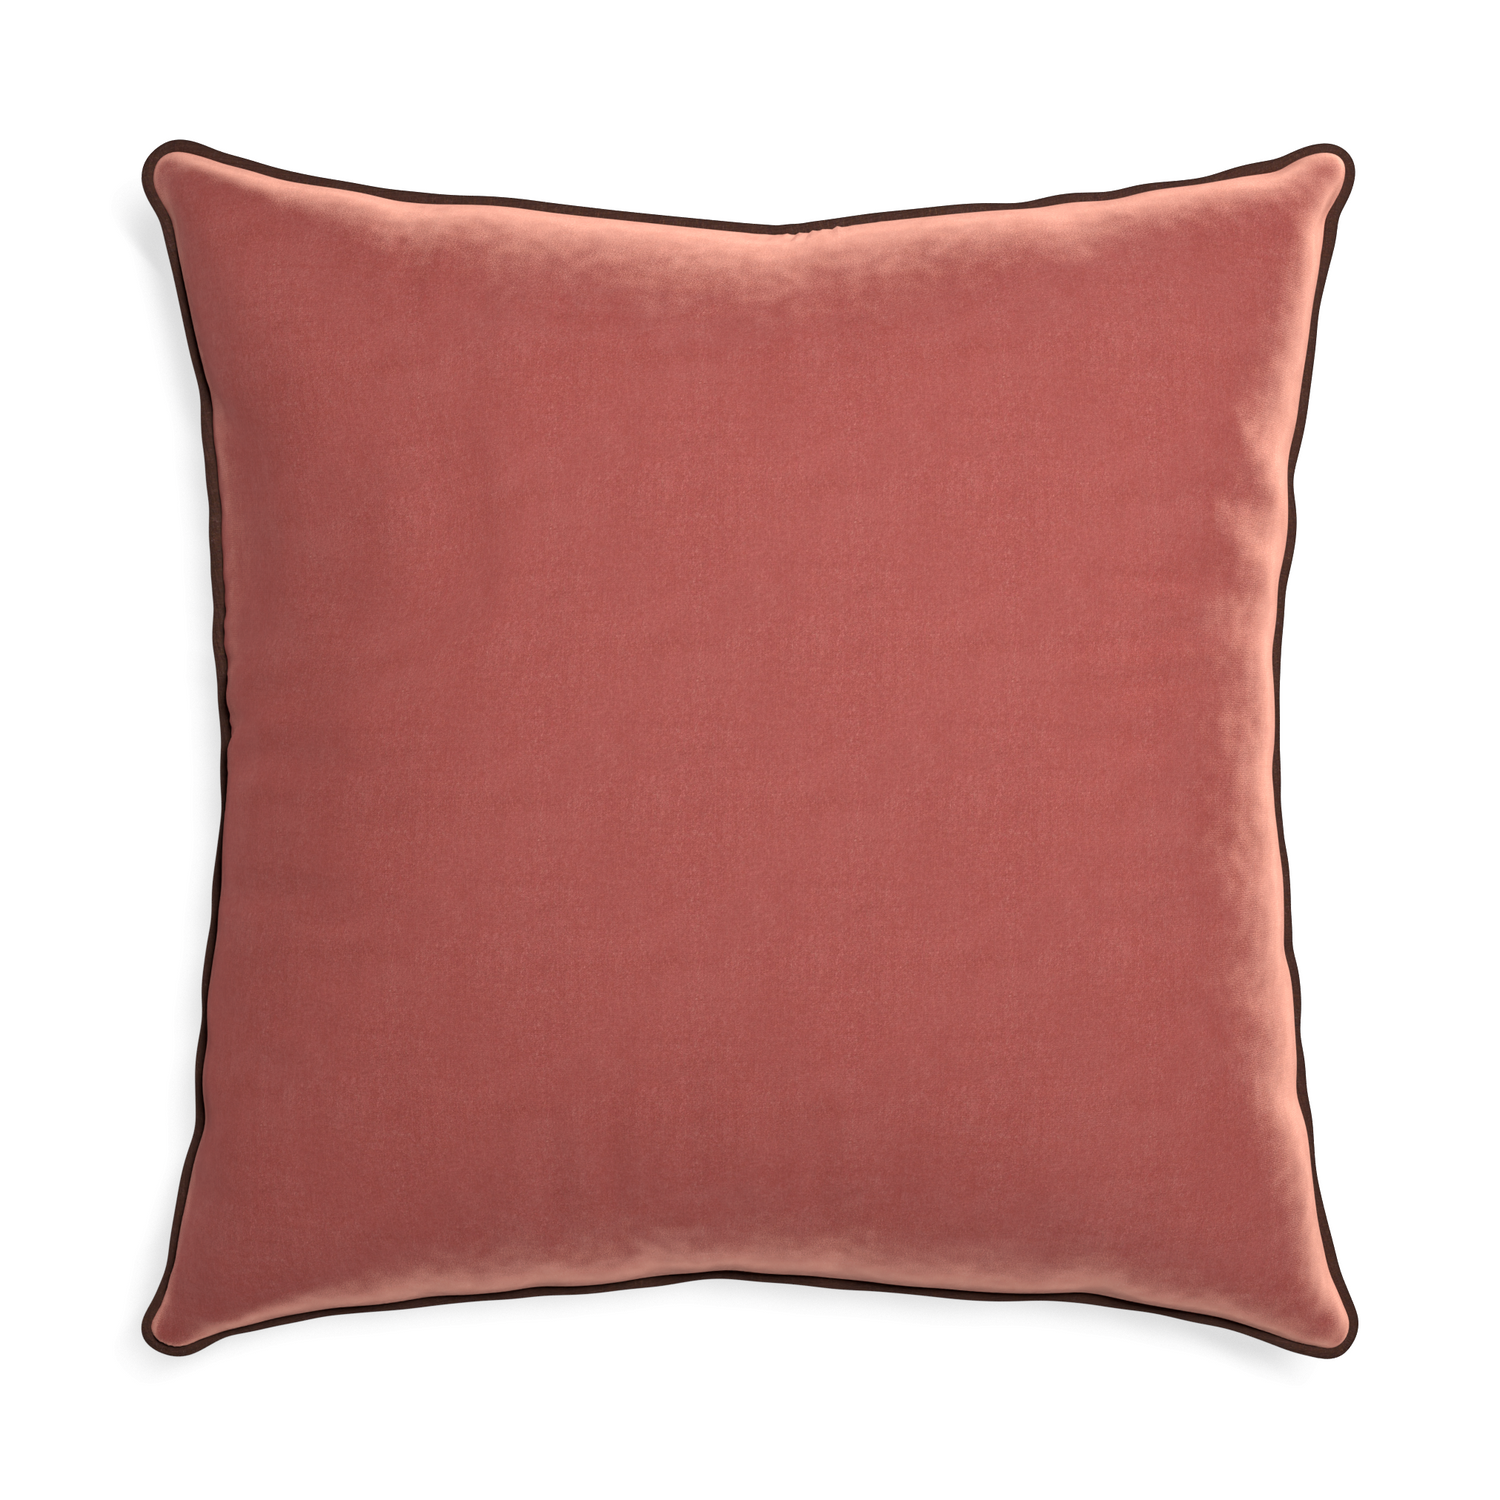 square coral velvet pillow with brown piping